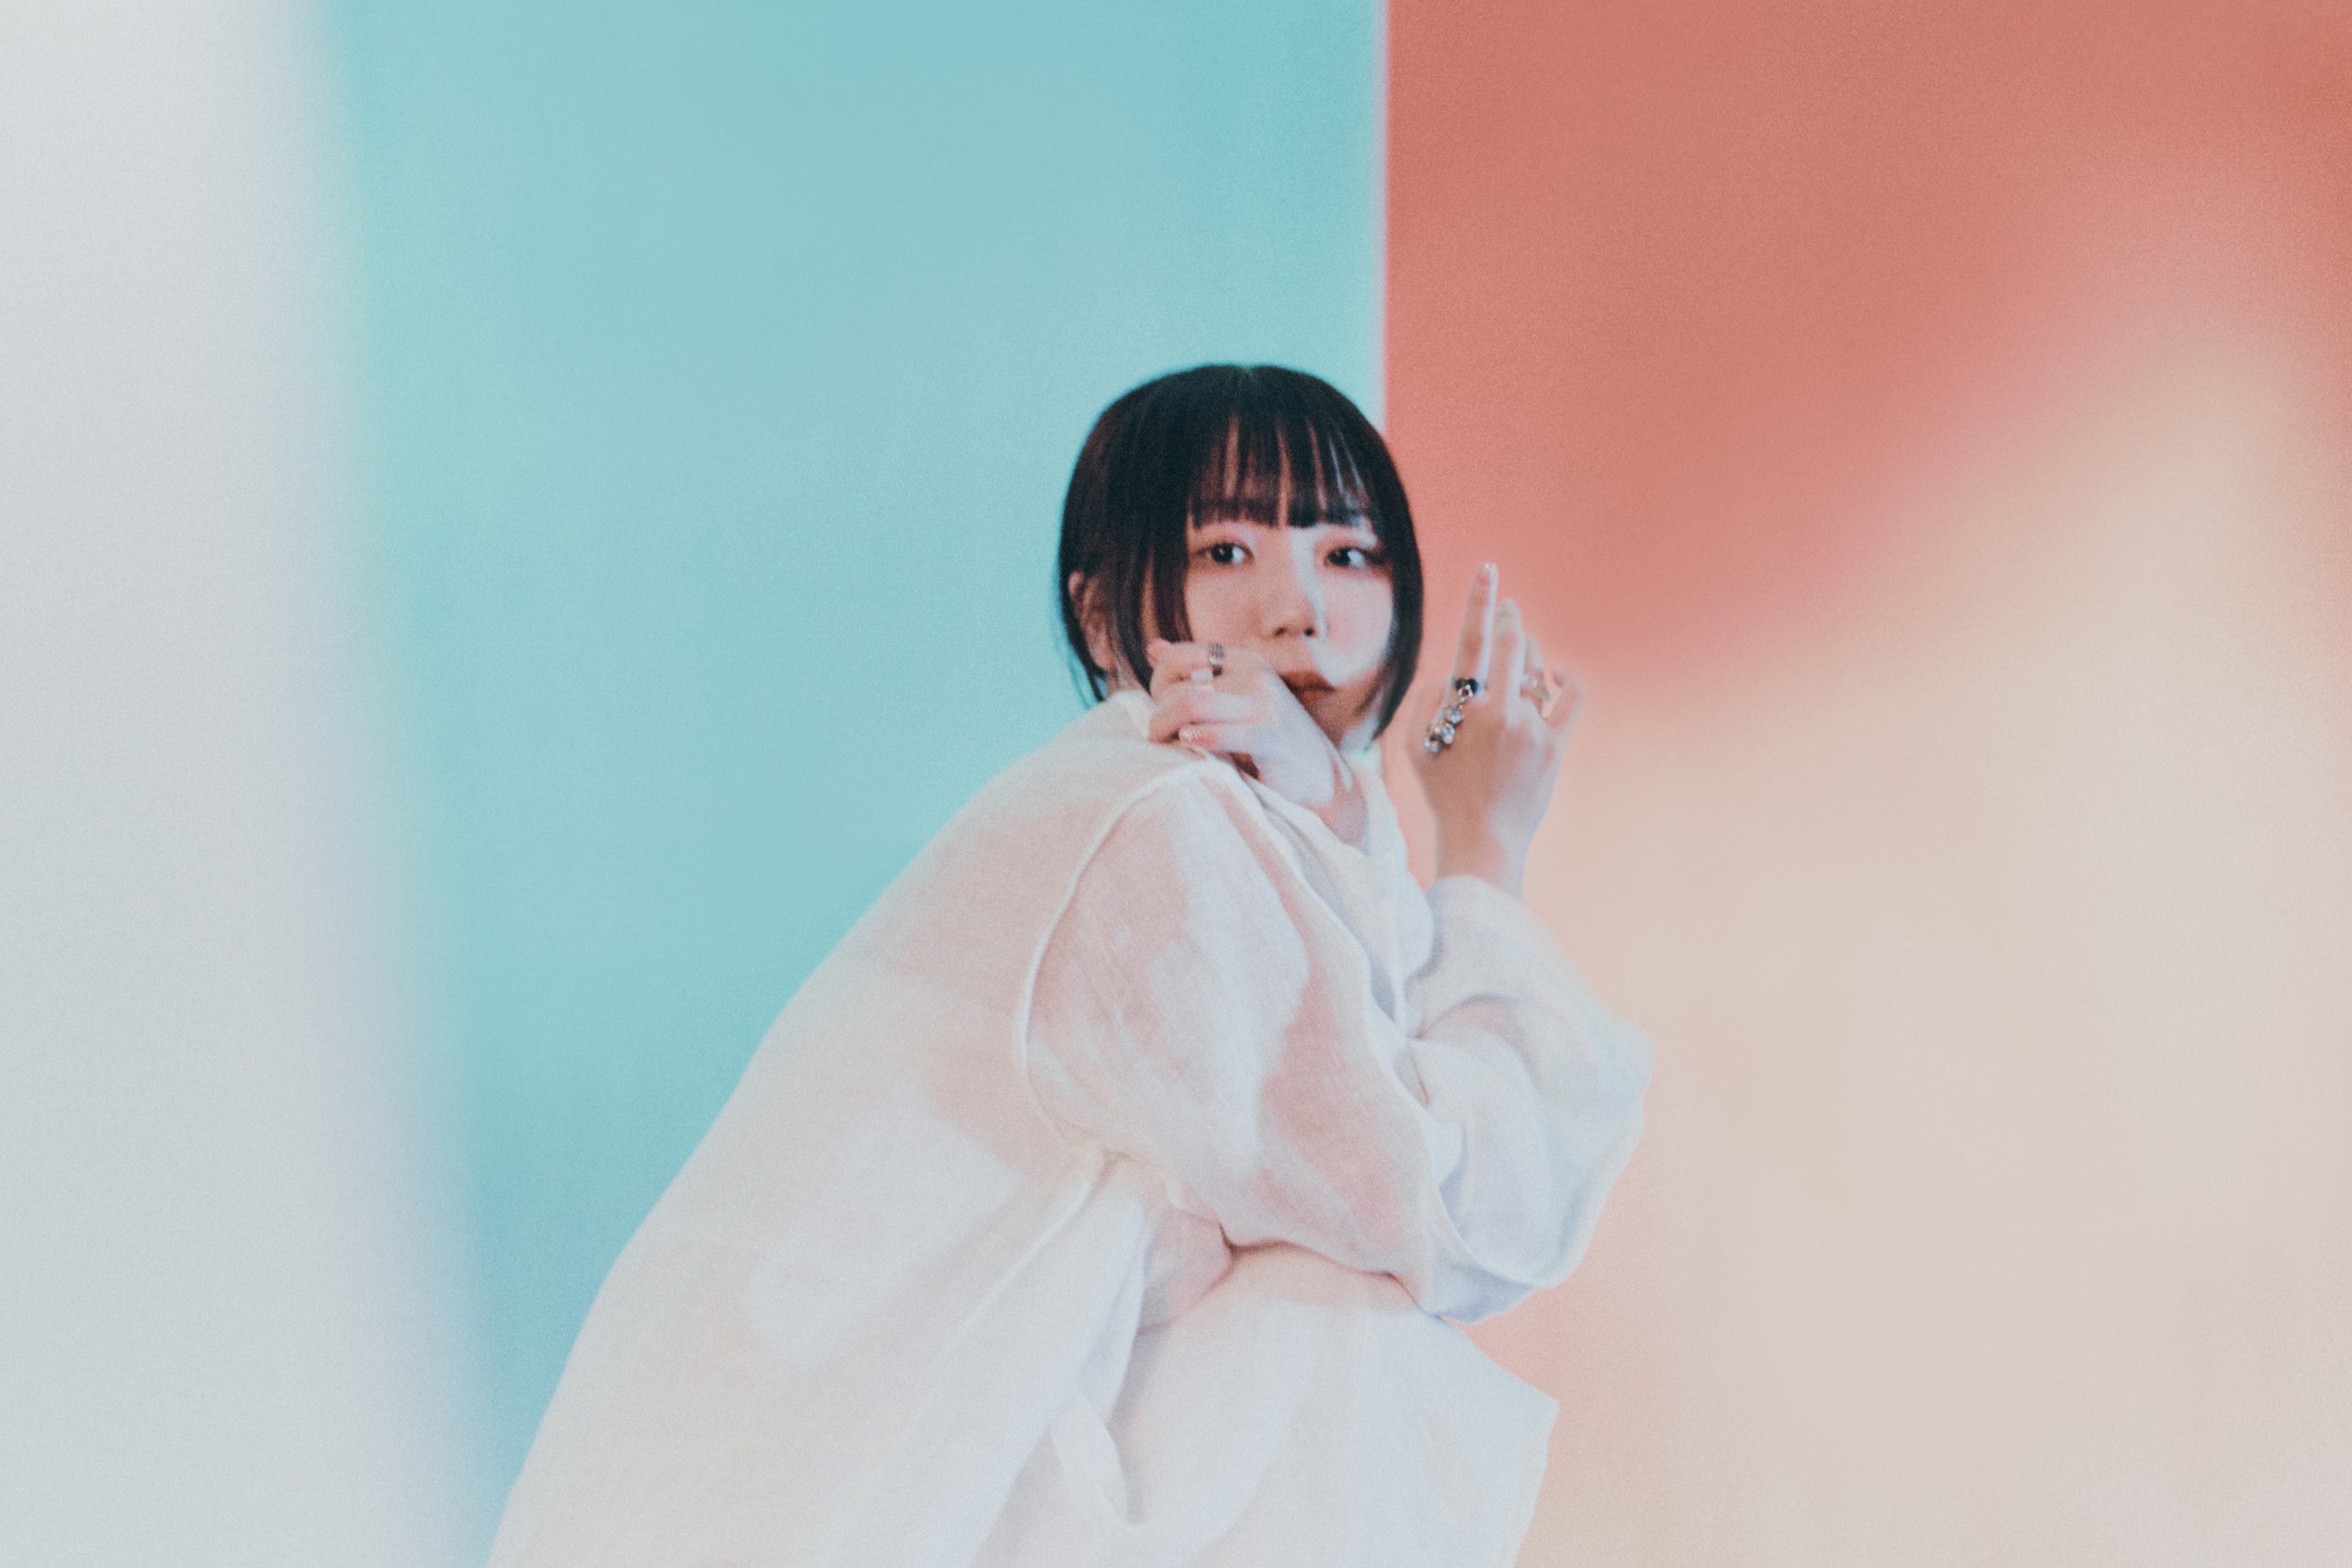 mekakushe-Artist-Photo-scaled Next-Generation Singer-Songwriter Mekakushe Launches New Private Label, “Akogare Records,” and Releases New Song!